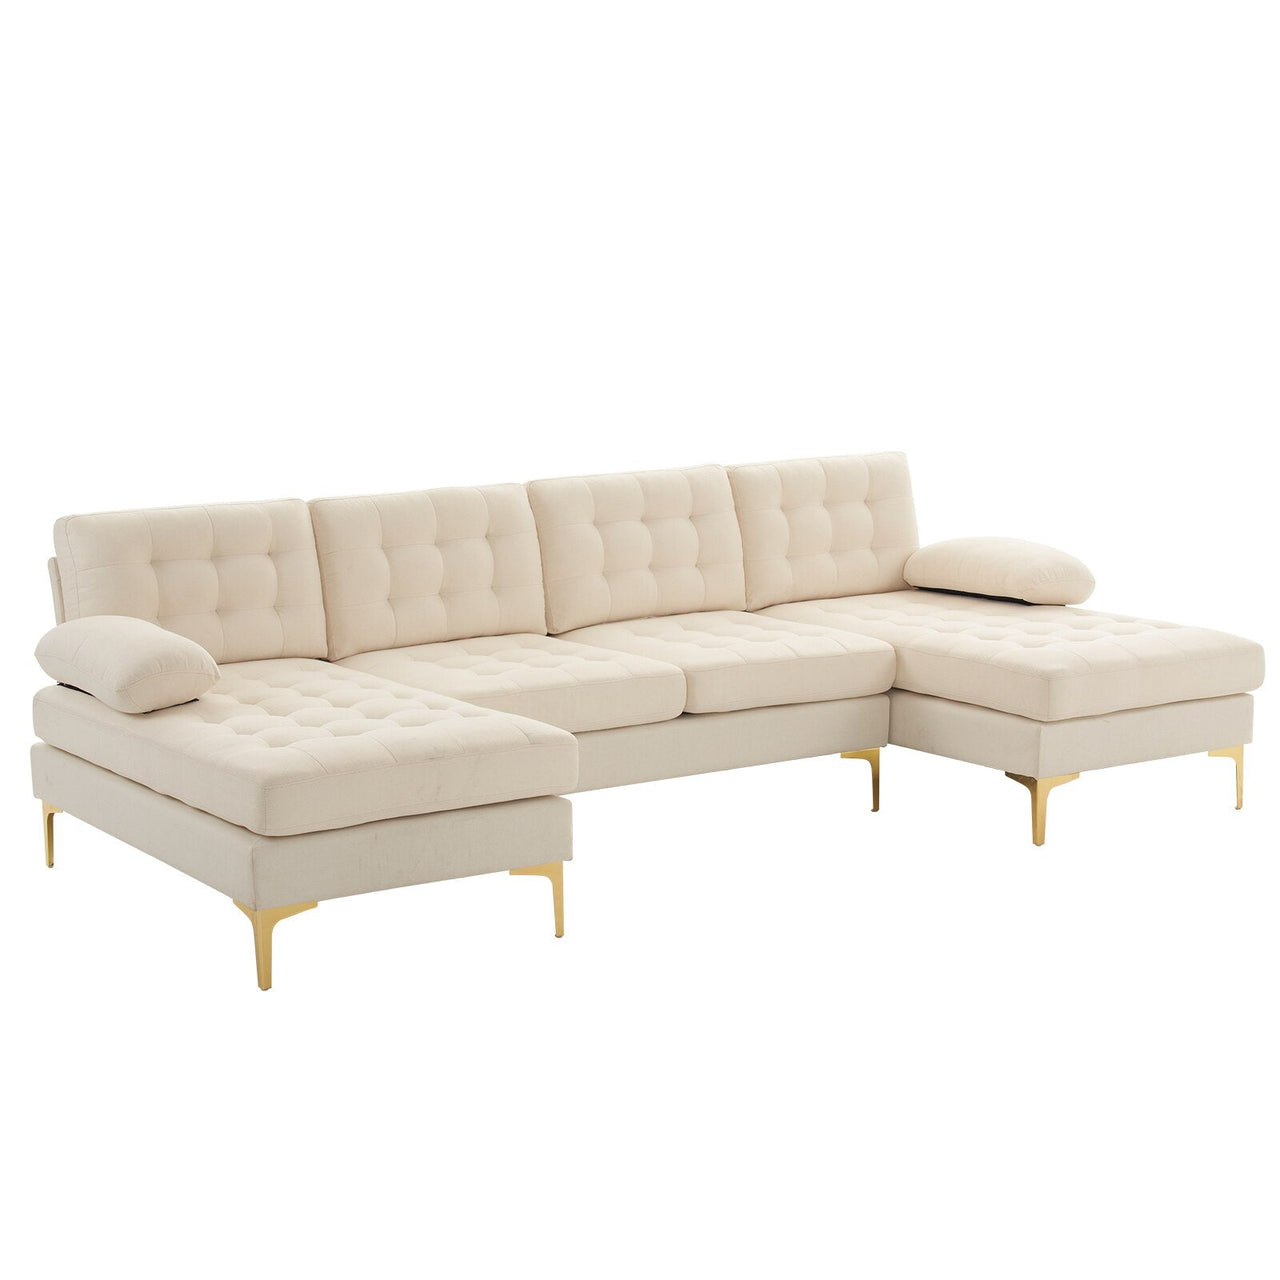 Beige Indoor Sectional Sofa with U - shaped Armrest and Golden Feet - Casatrail.com